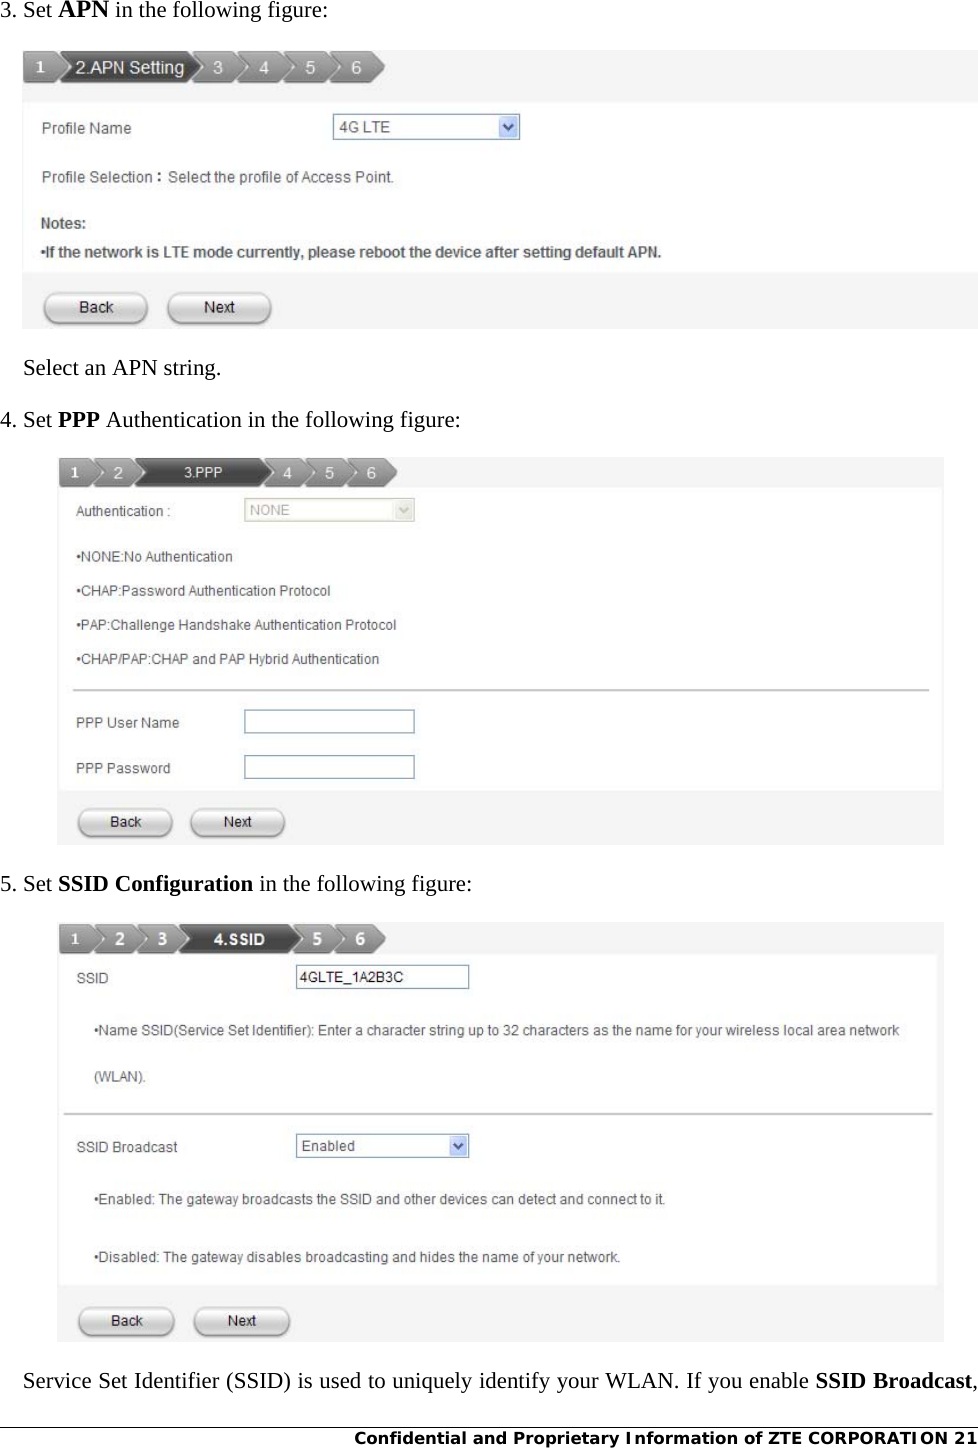 Confidential and Proprietary Information of ZTE CORPORATION 21  3. Set APN in the following figure:  Select an APN string.   4. Set PPP Authentication in the following figure:  5. Set SSID Configuration in the following figure:  Service Set Identifier (SSID) is used to uniquely identify your WLAN. If you enable SSID Broadcast, 